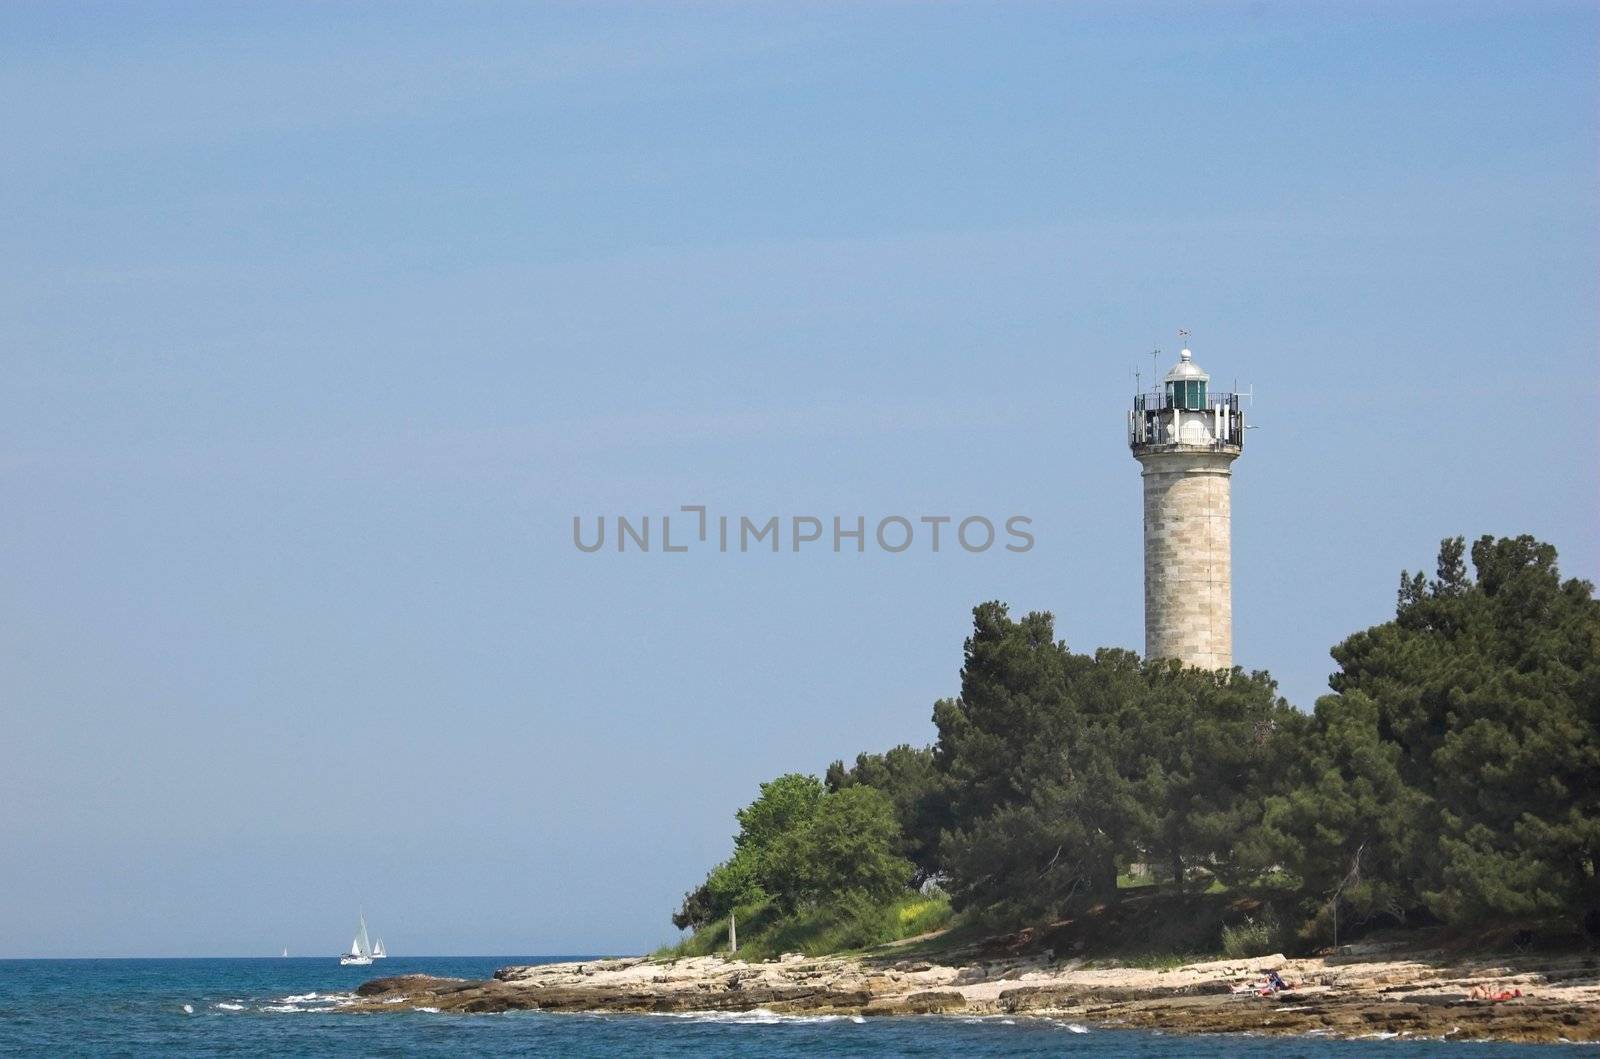 Croatian lighthouse in the region of Umag